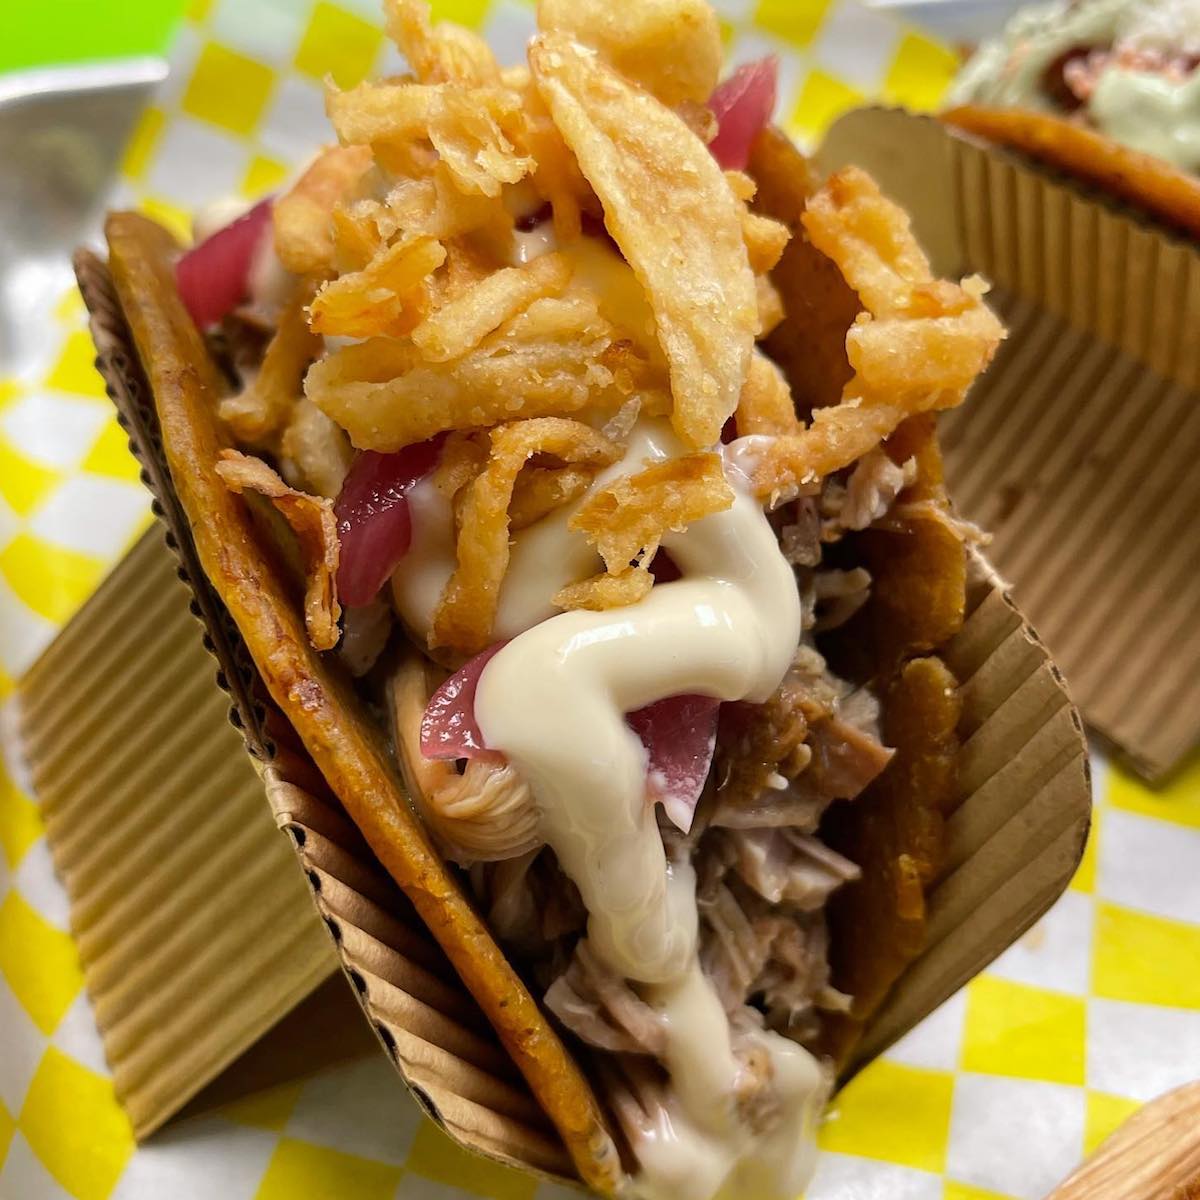 Brisket and Pulled Pork Tacoton from The Crazy Toston in Miami, Florida